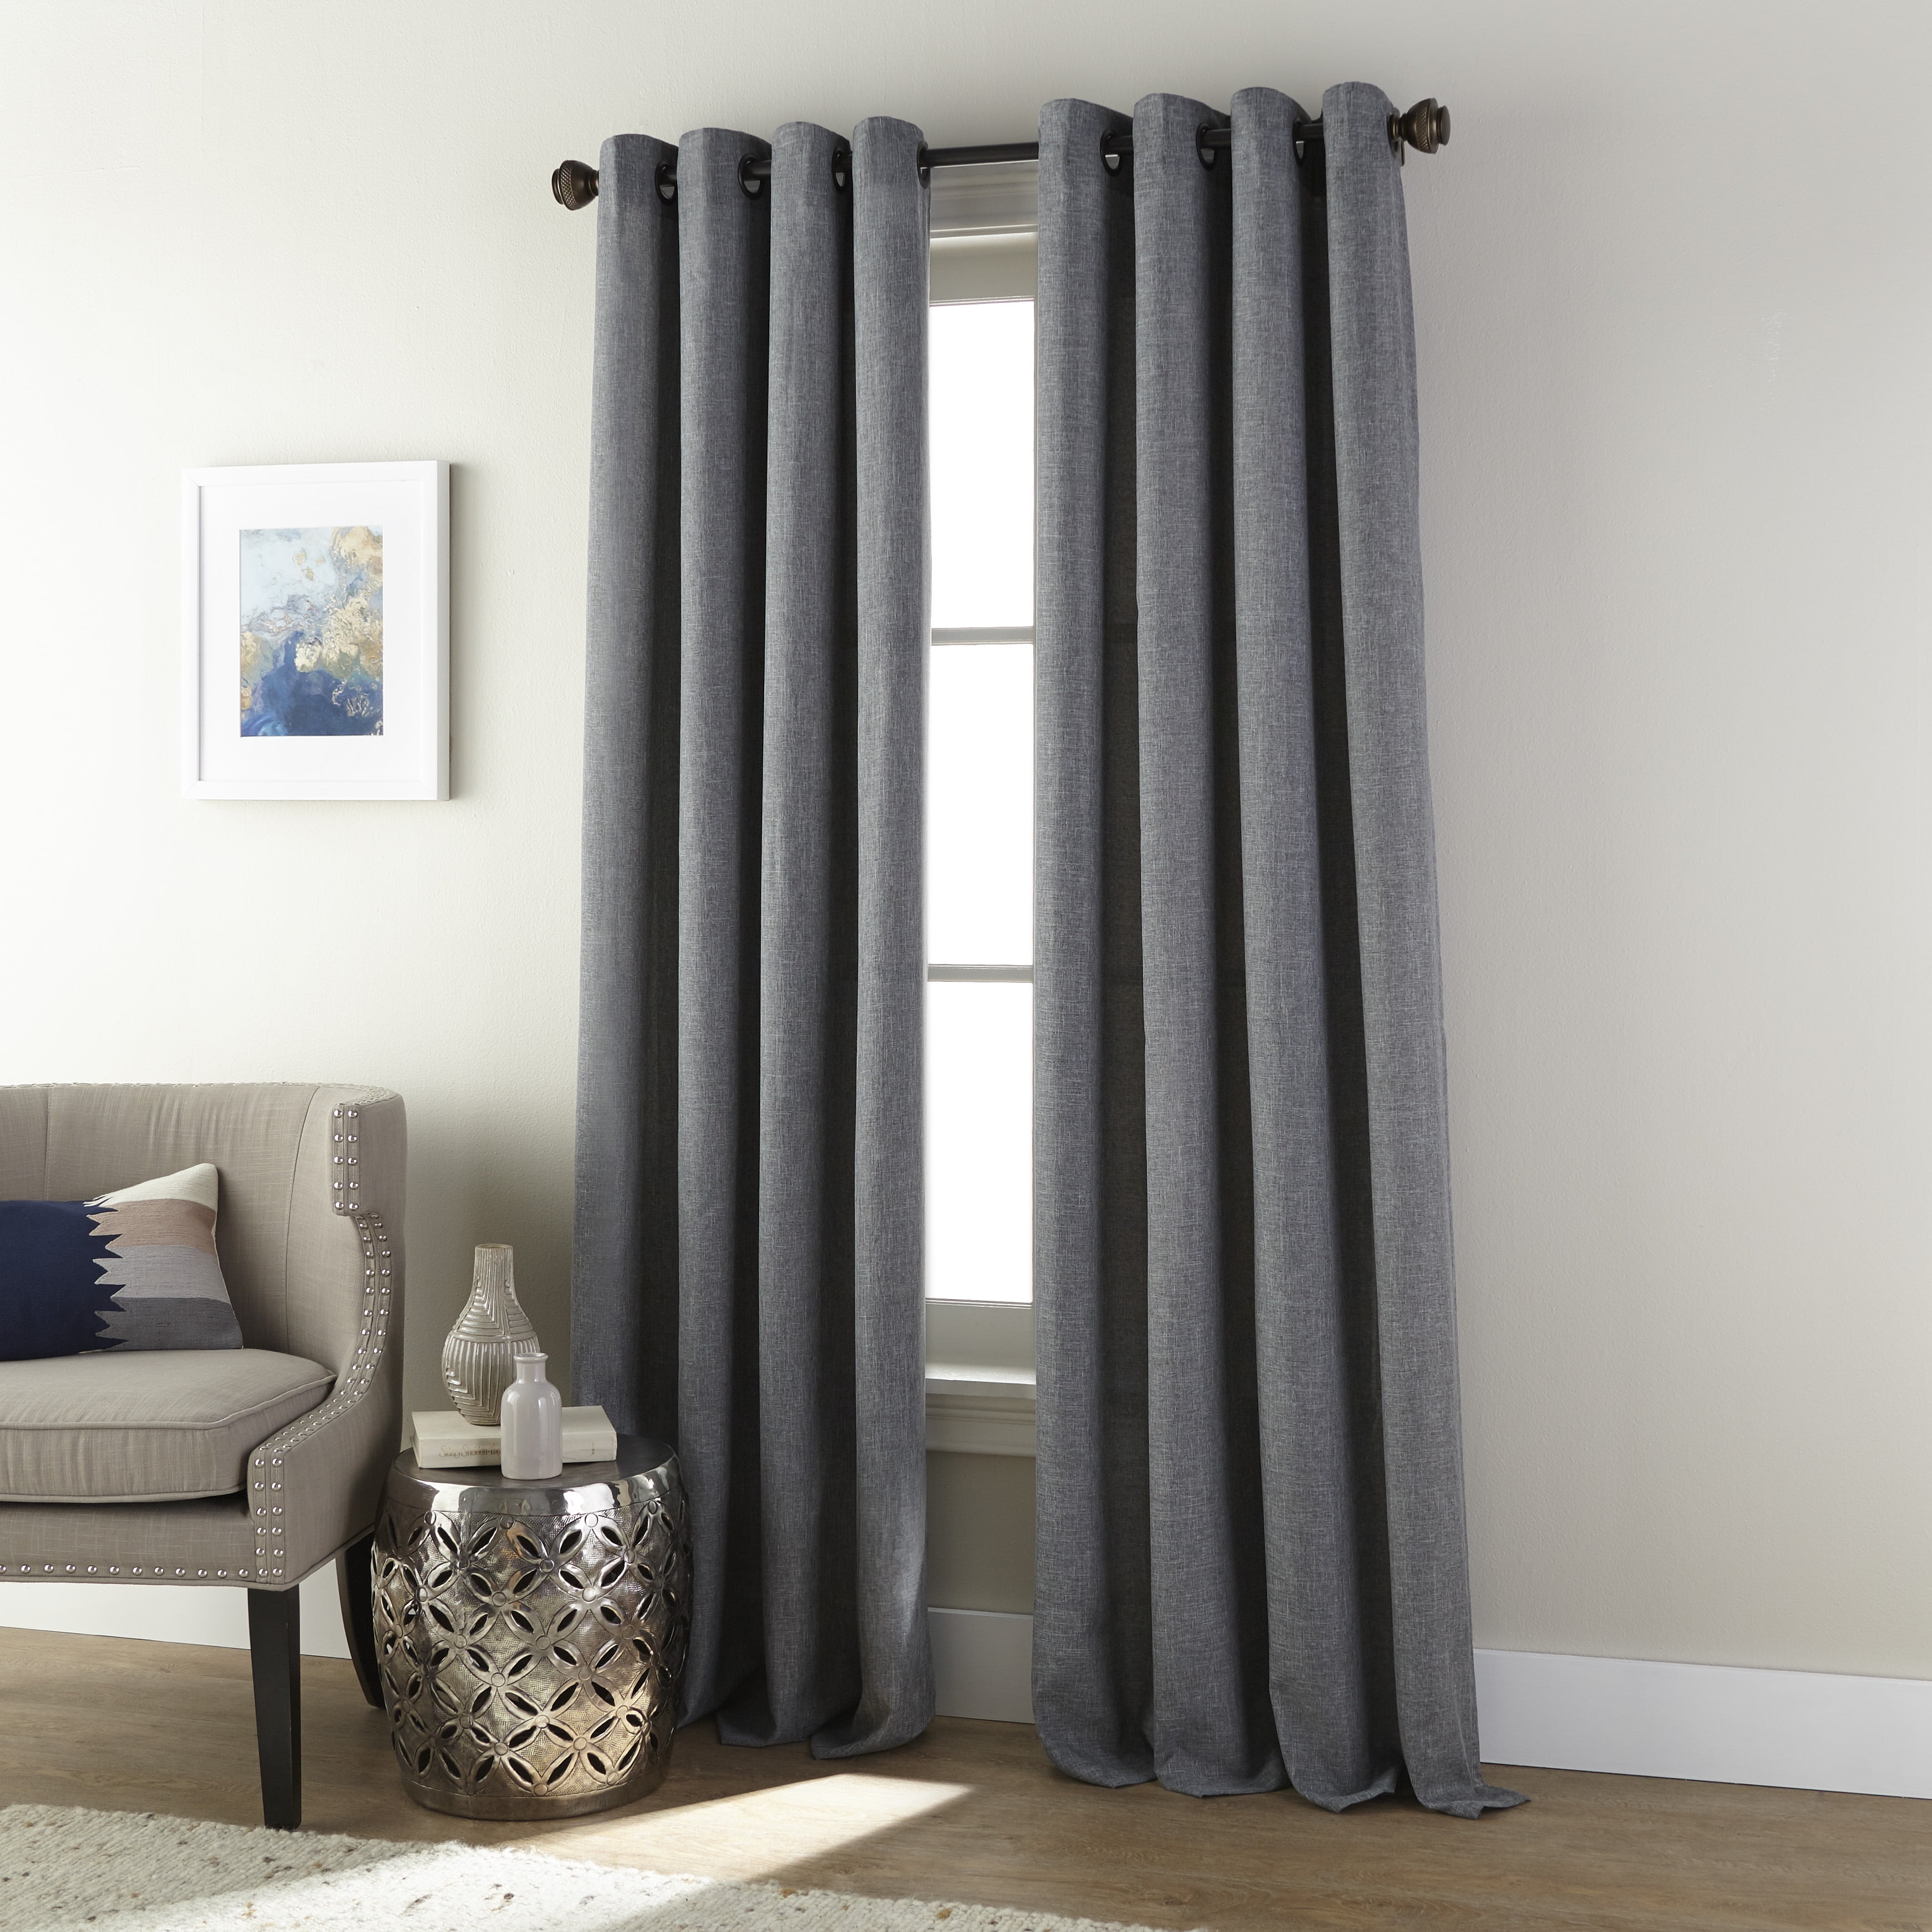 Details about   Unistar 2 Panels Blackout Stars Curtains For Kids Girls Bedroom Aesthetic Living 